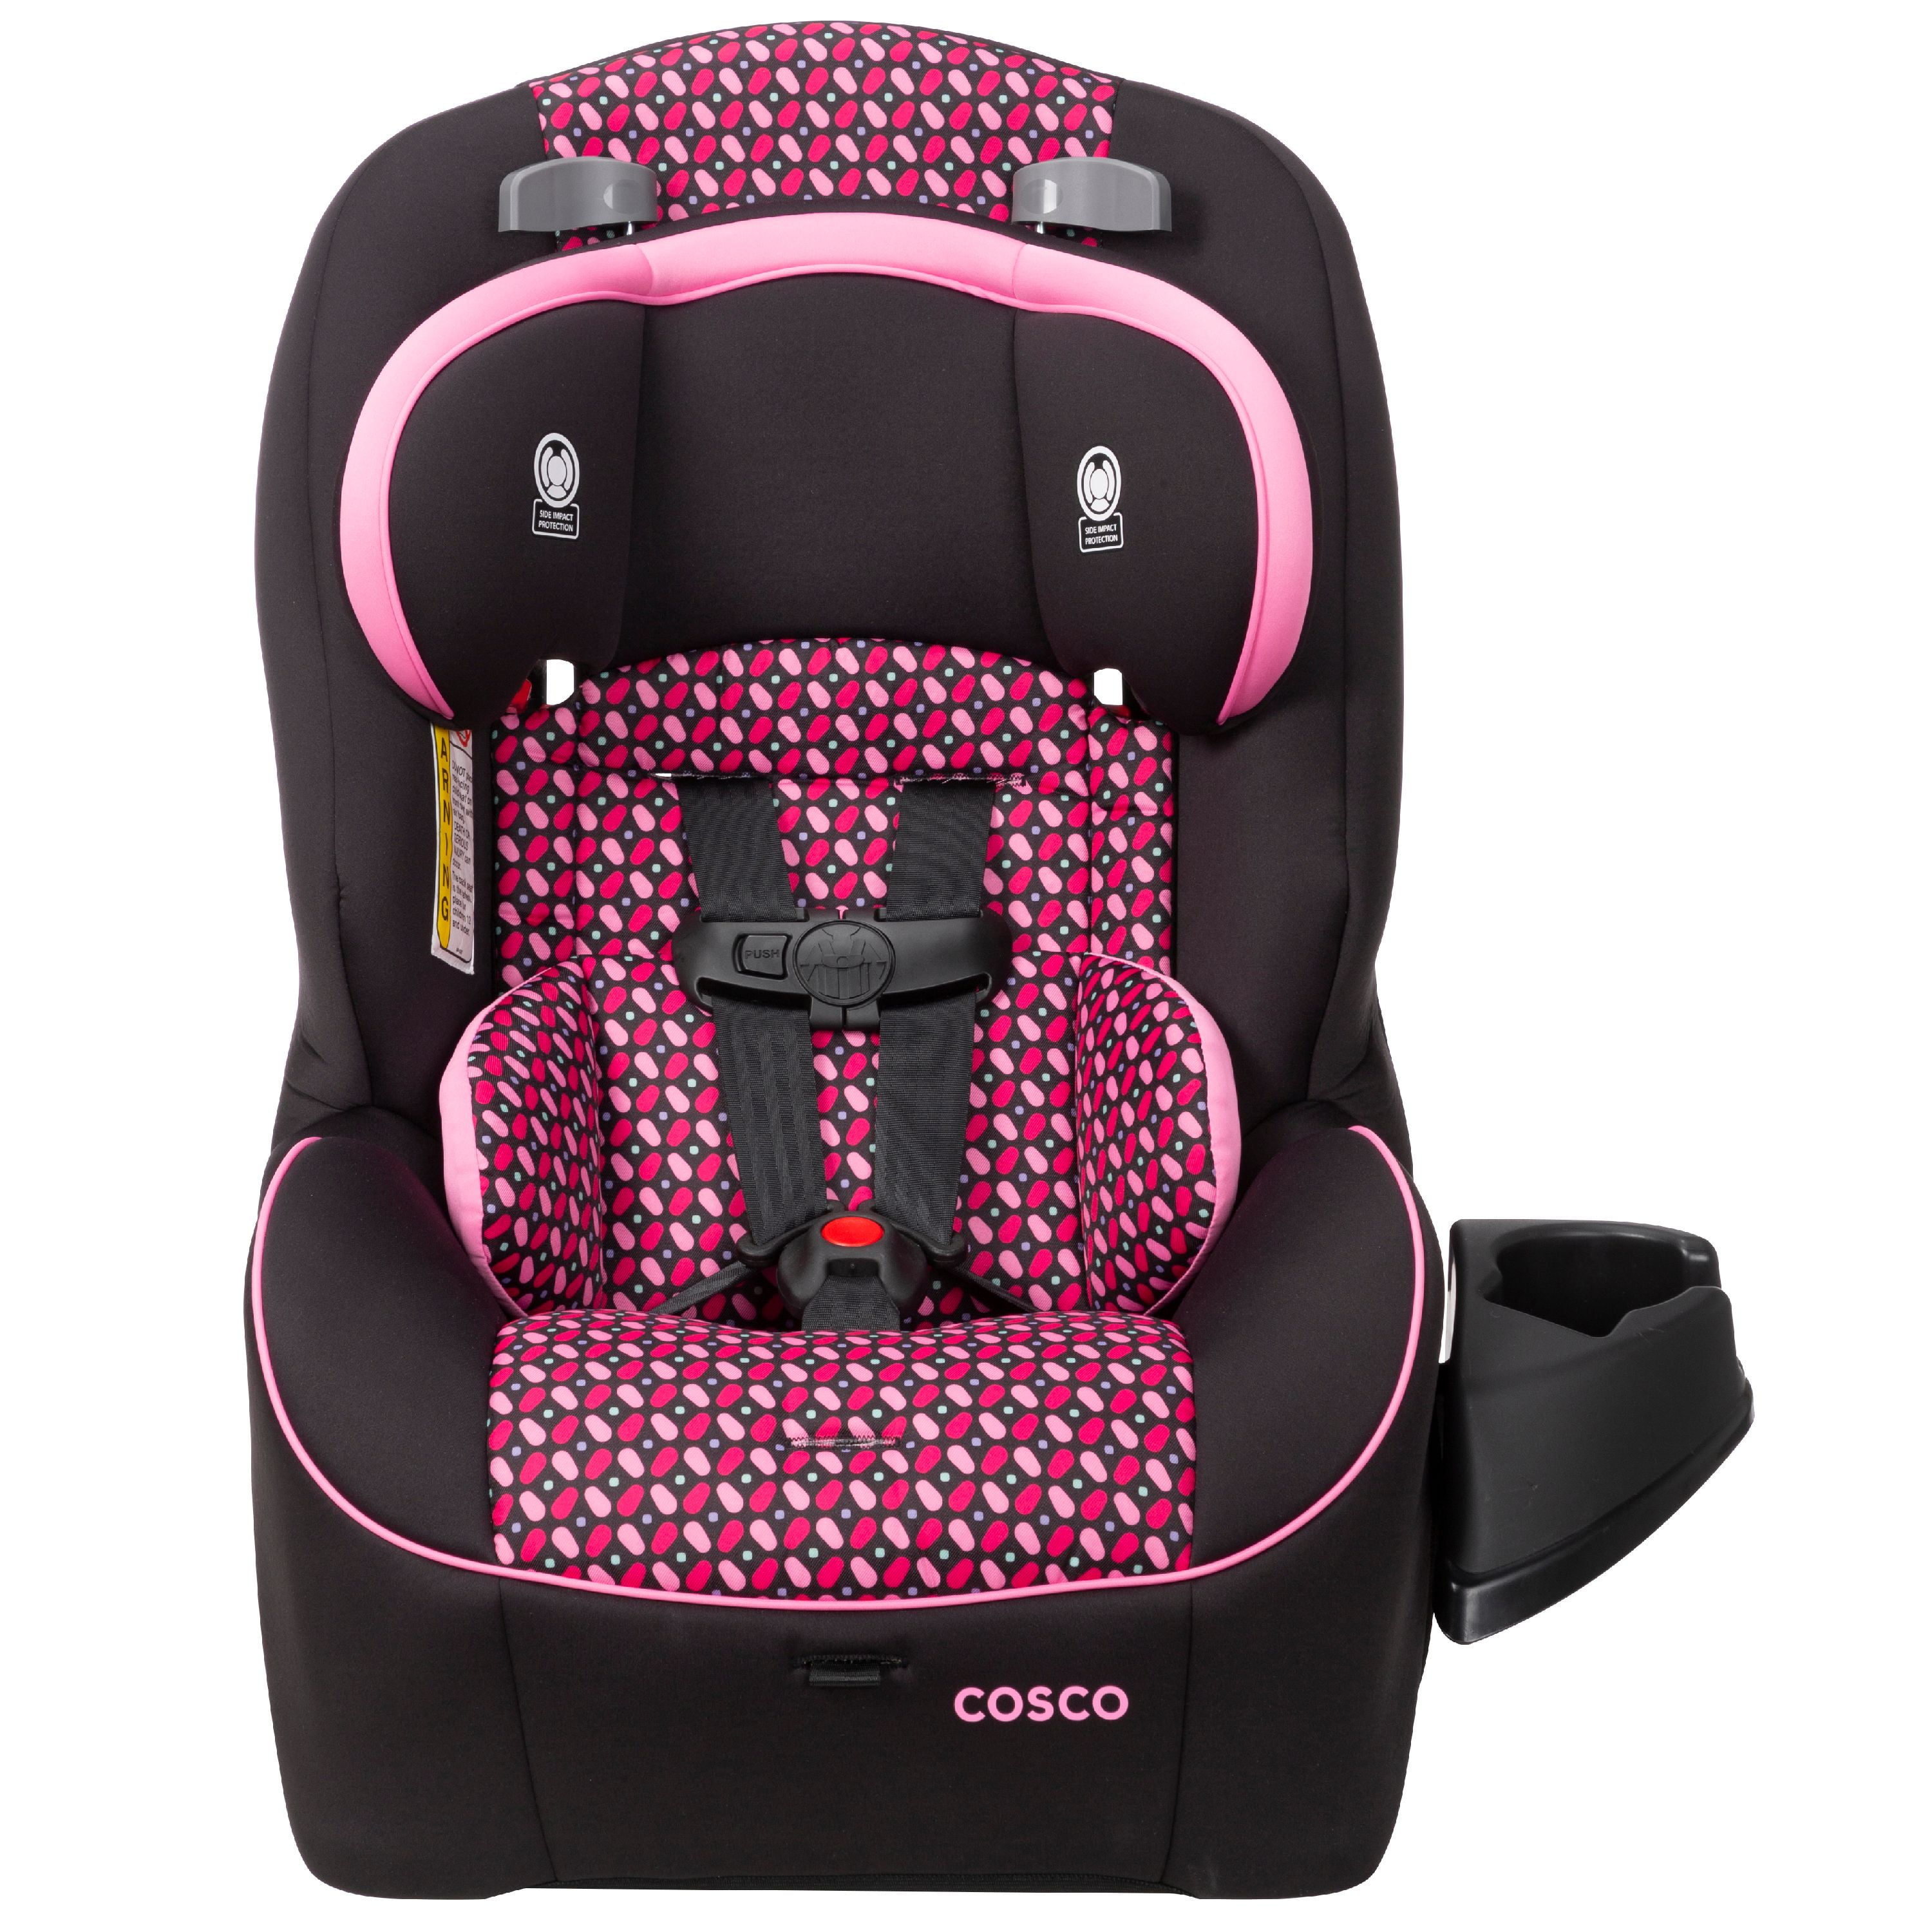 Walmart Convertible Car Seat A Comprehensive Review And Buyer s Guide 